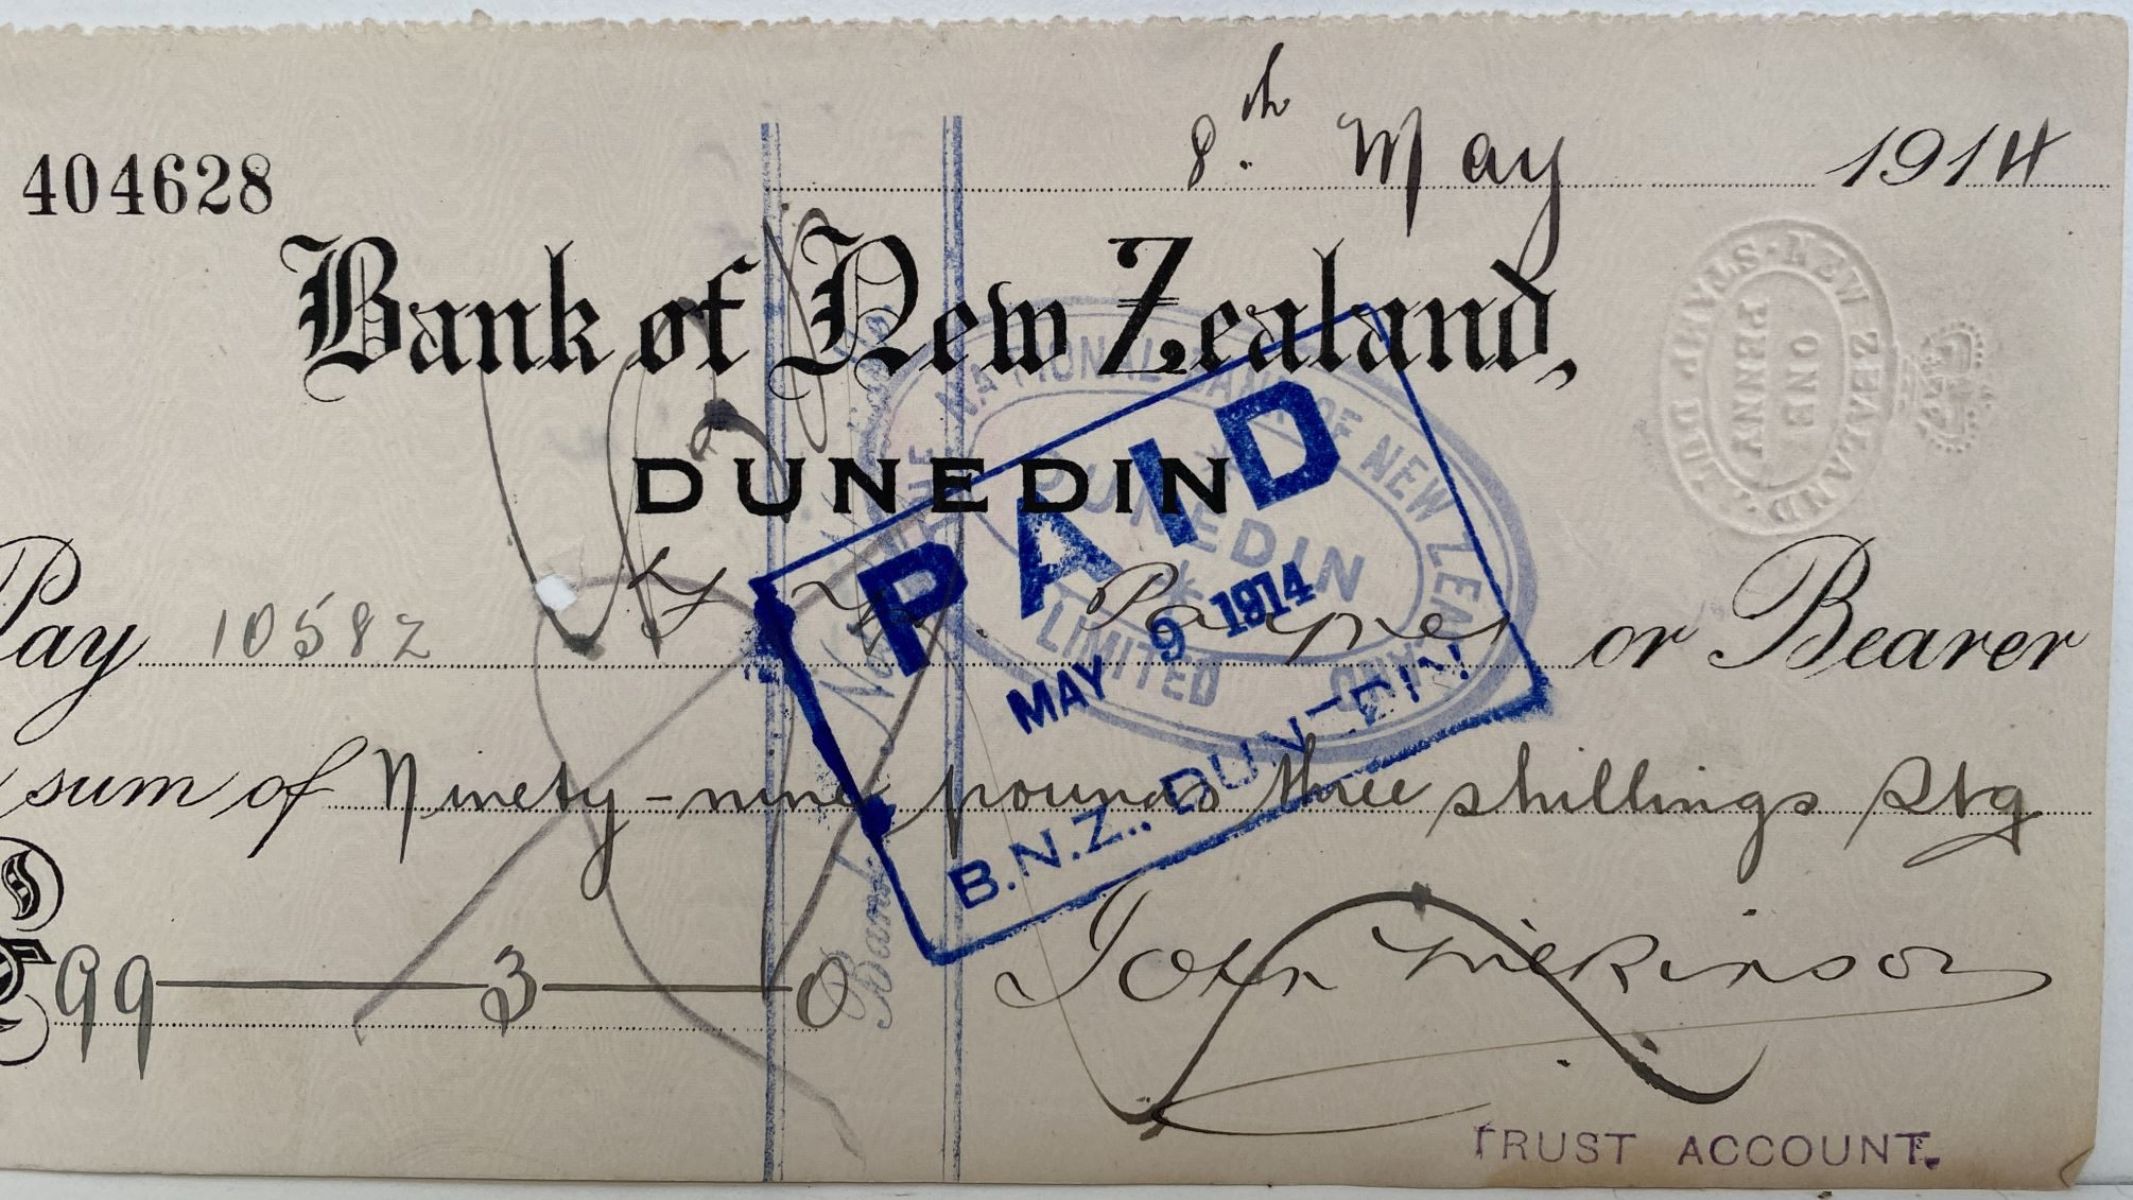 OLD BANKING MEMORABILIA: Bank cheque issued by BNZ Bank, Dunedin 1914